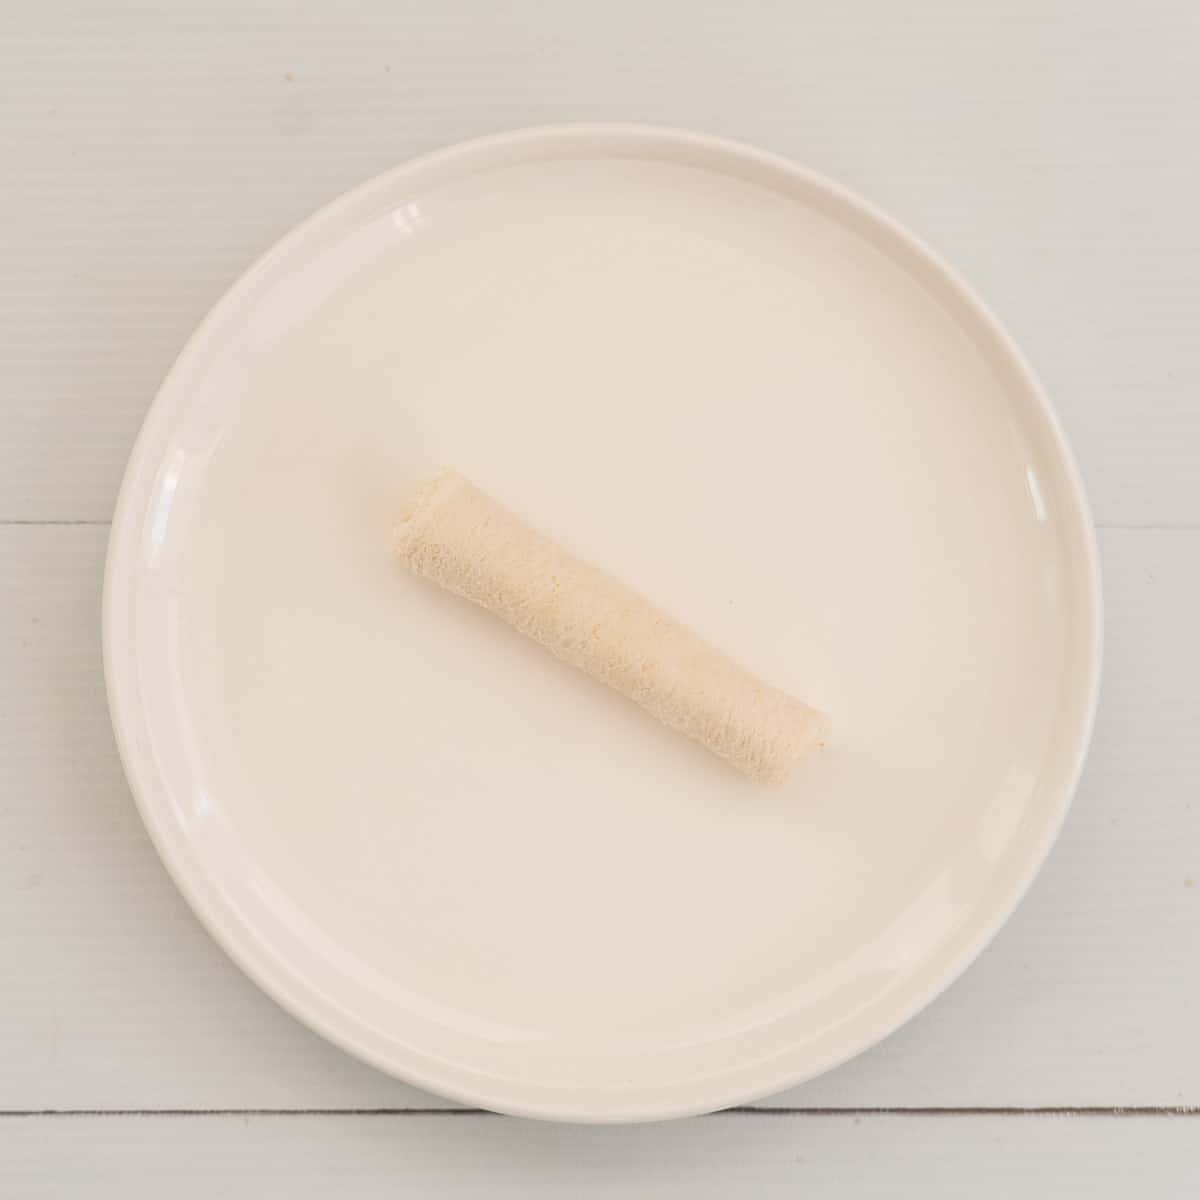 Roled slice of bread on a white plate